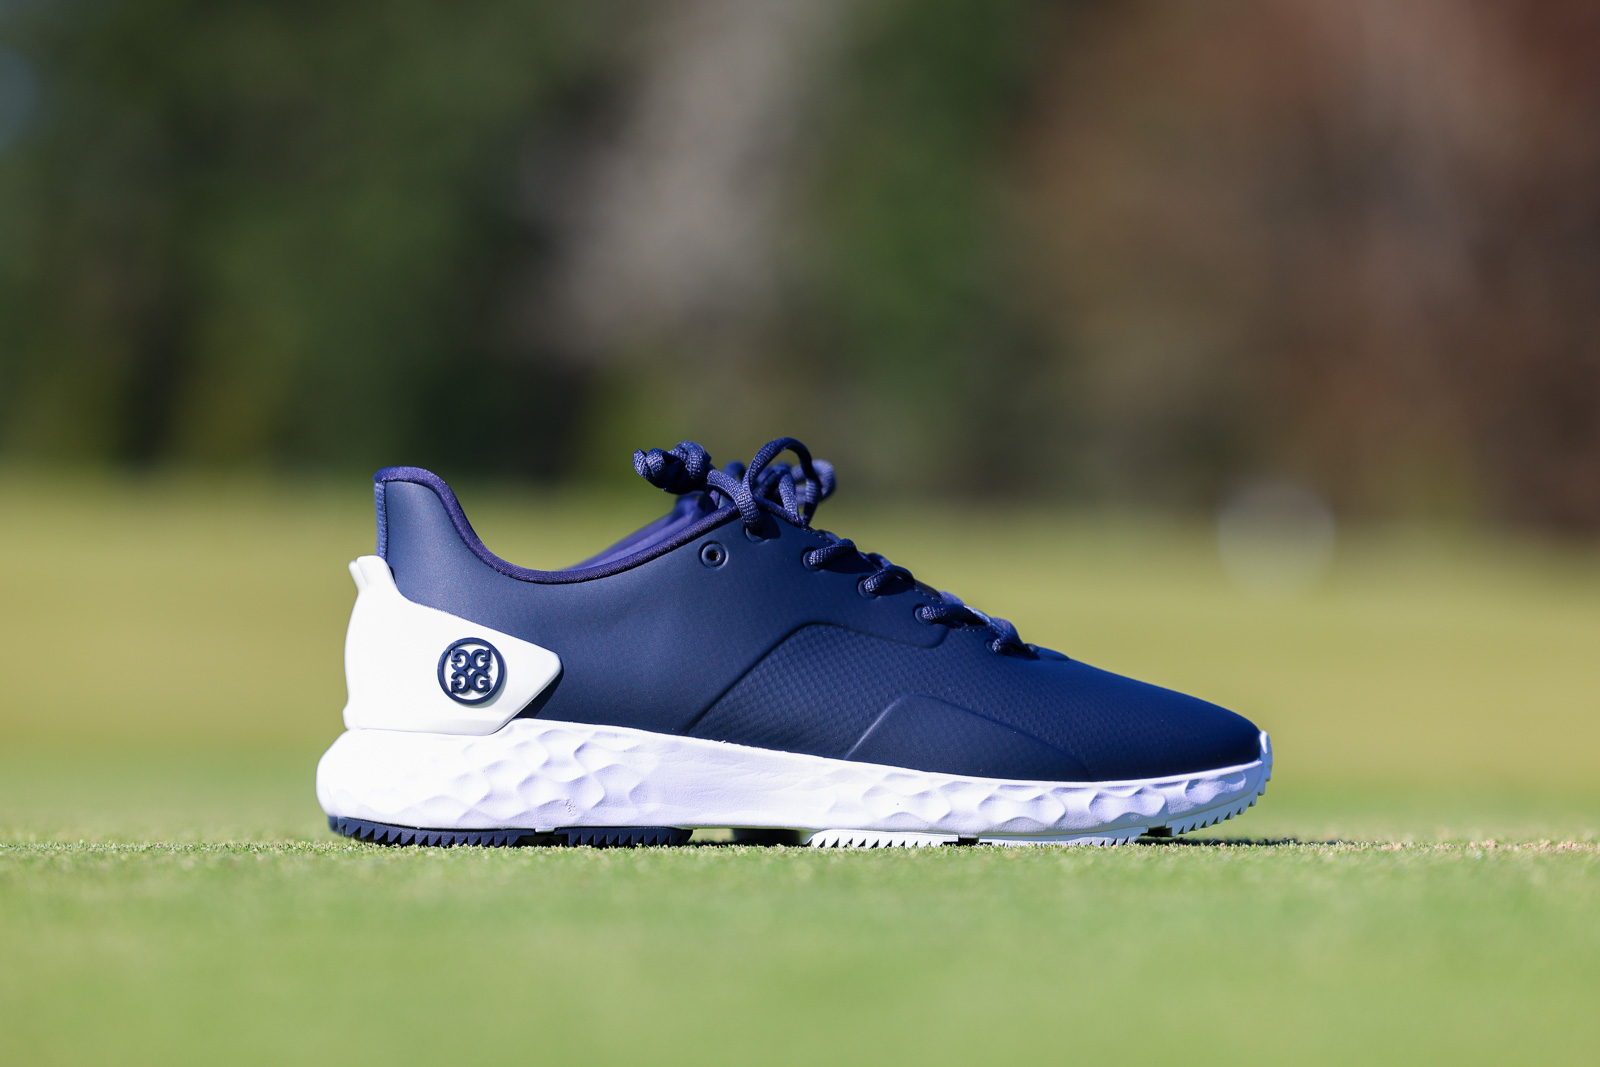 G/Fore MG4+ Golf Shoe - Use Code G4BREAKING8010 to save 10%!